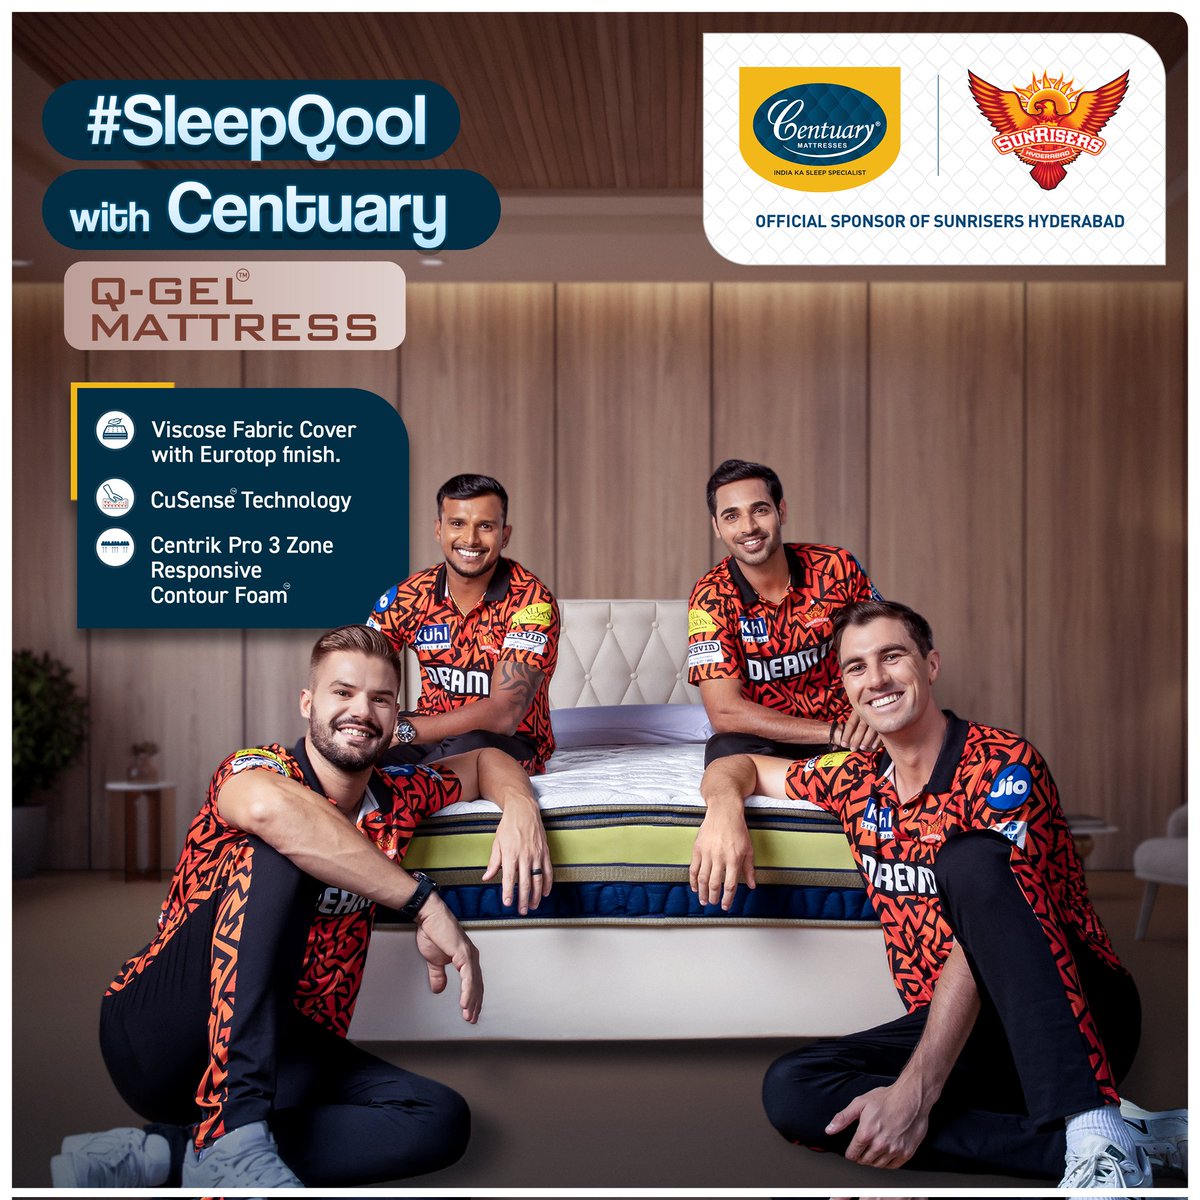 Score big on comfort with the #SleepQool with Centuary Q-Gel mattress! Featuring Viscose Fabric cover with Eurotop finish, CuSense Technology, and Centrik Pro 3 Zone, get ready for a winning night’s sleep! 🏏😴🛏️